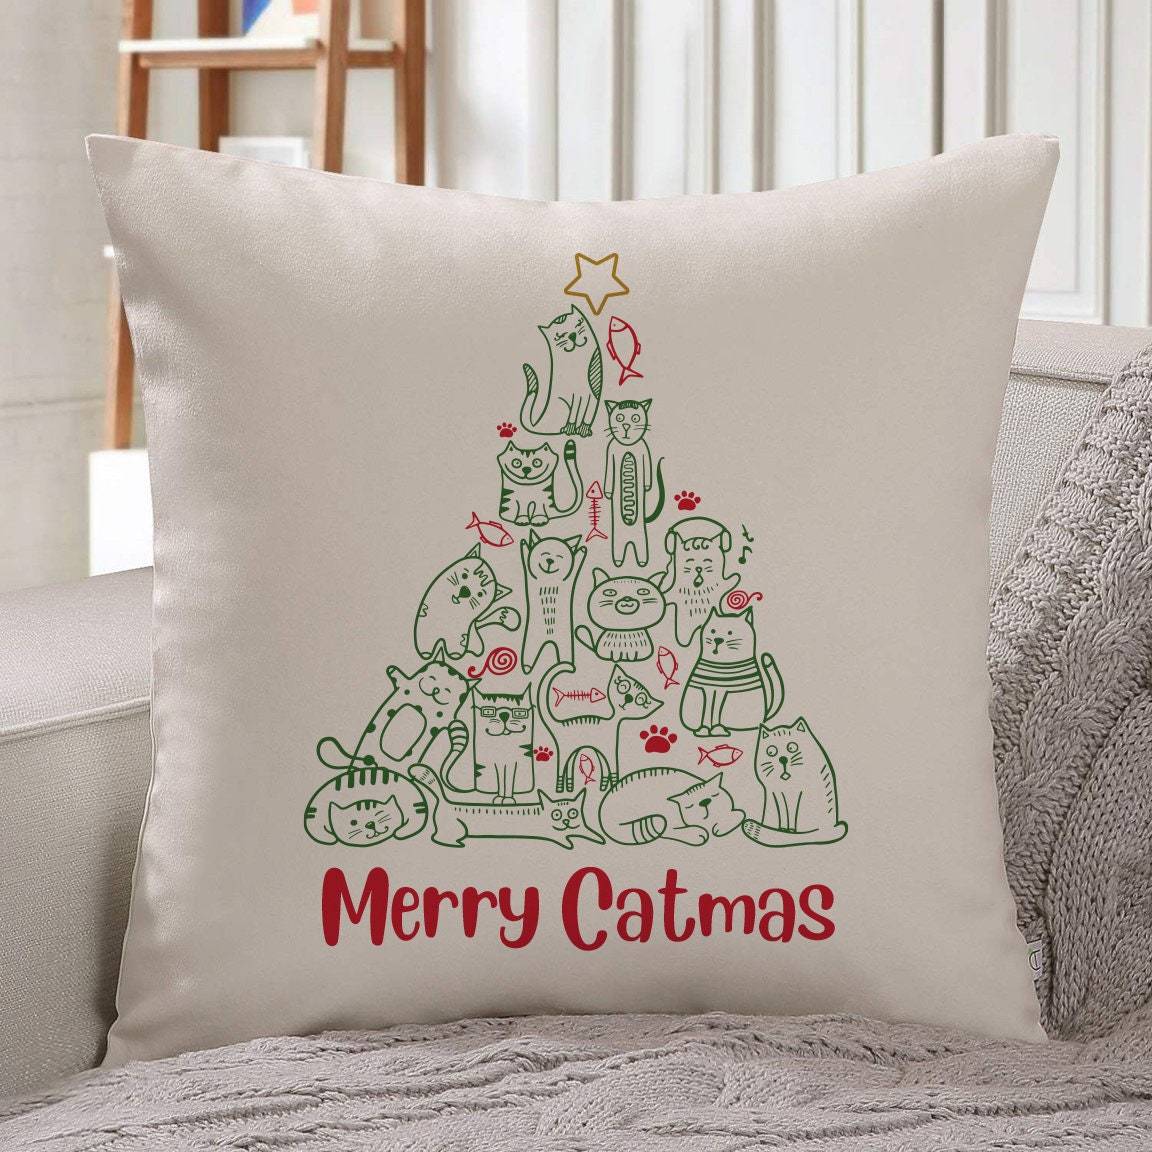 Merry catmas cushion, Cat owner Christmas gift, Catlover Xmas present